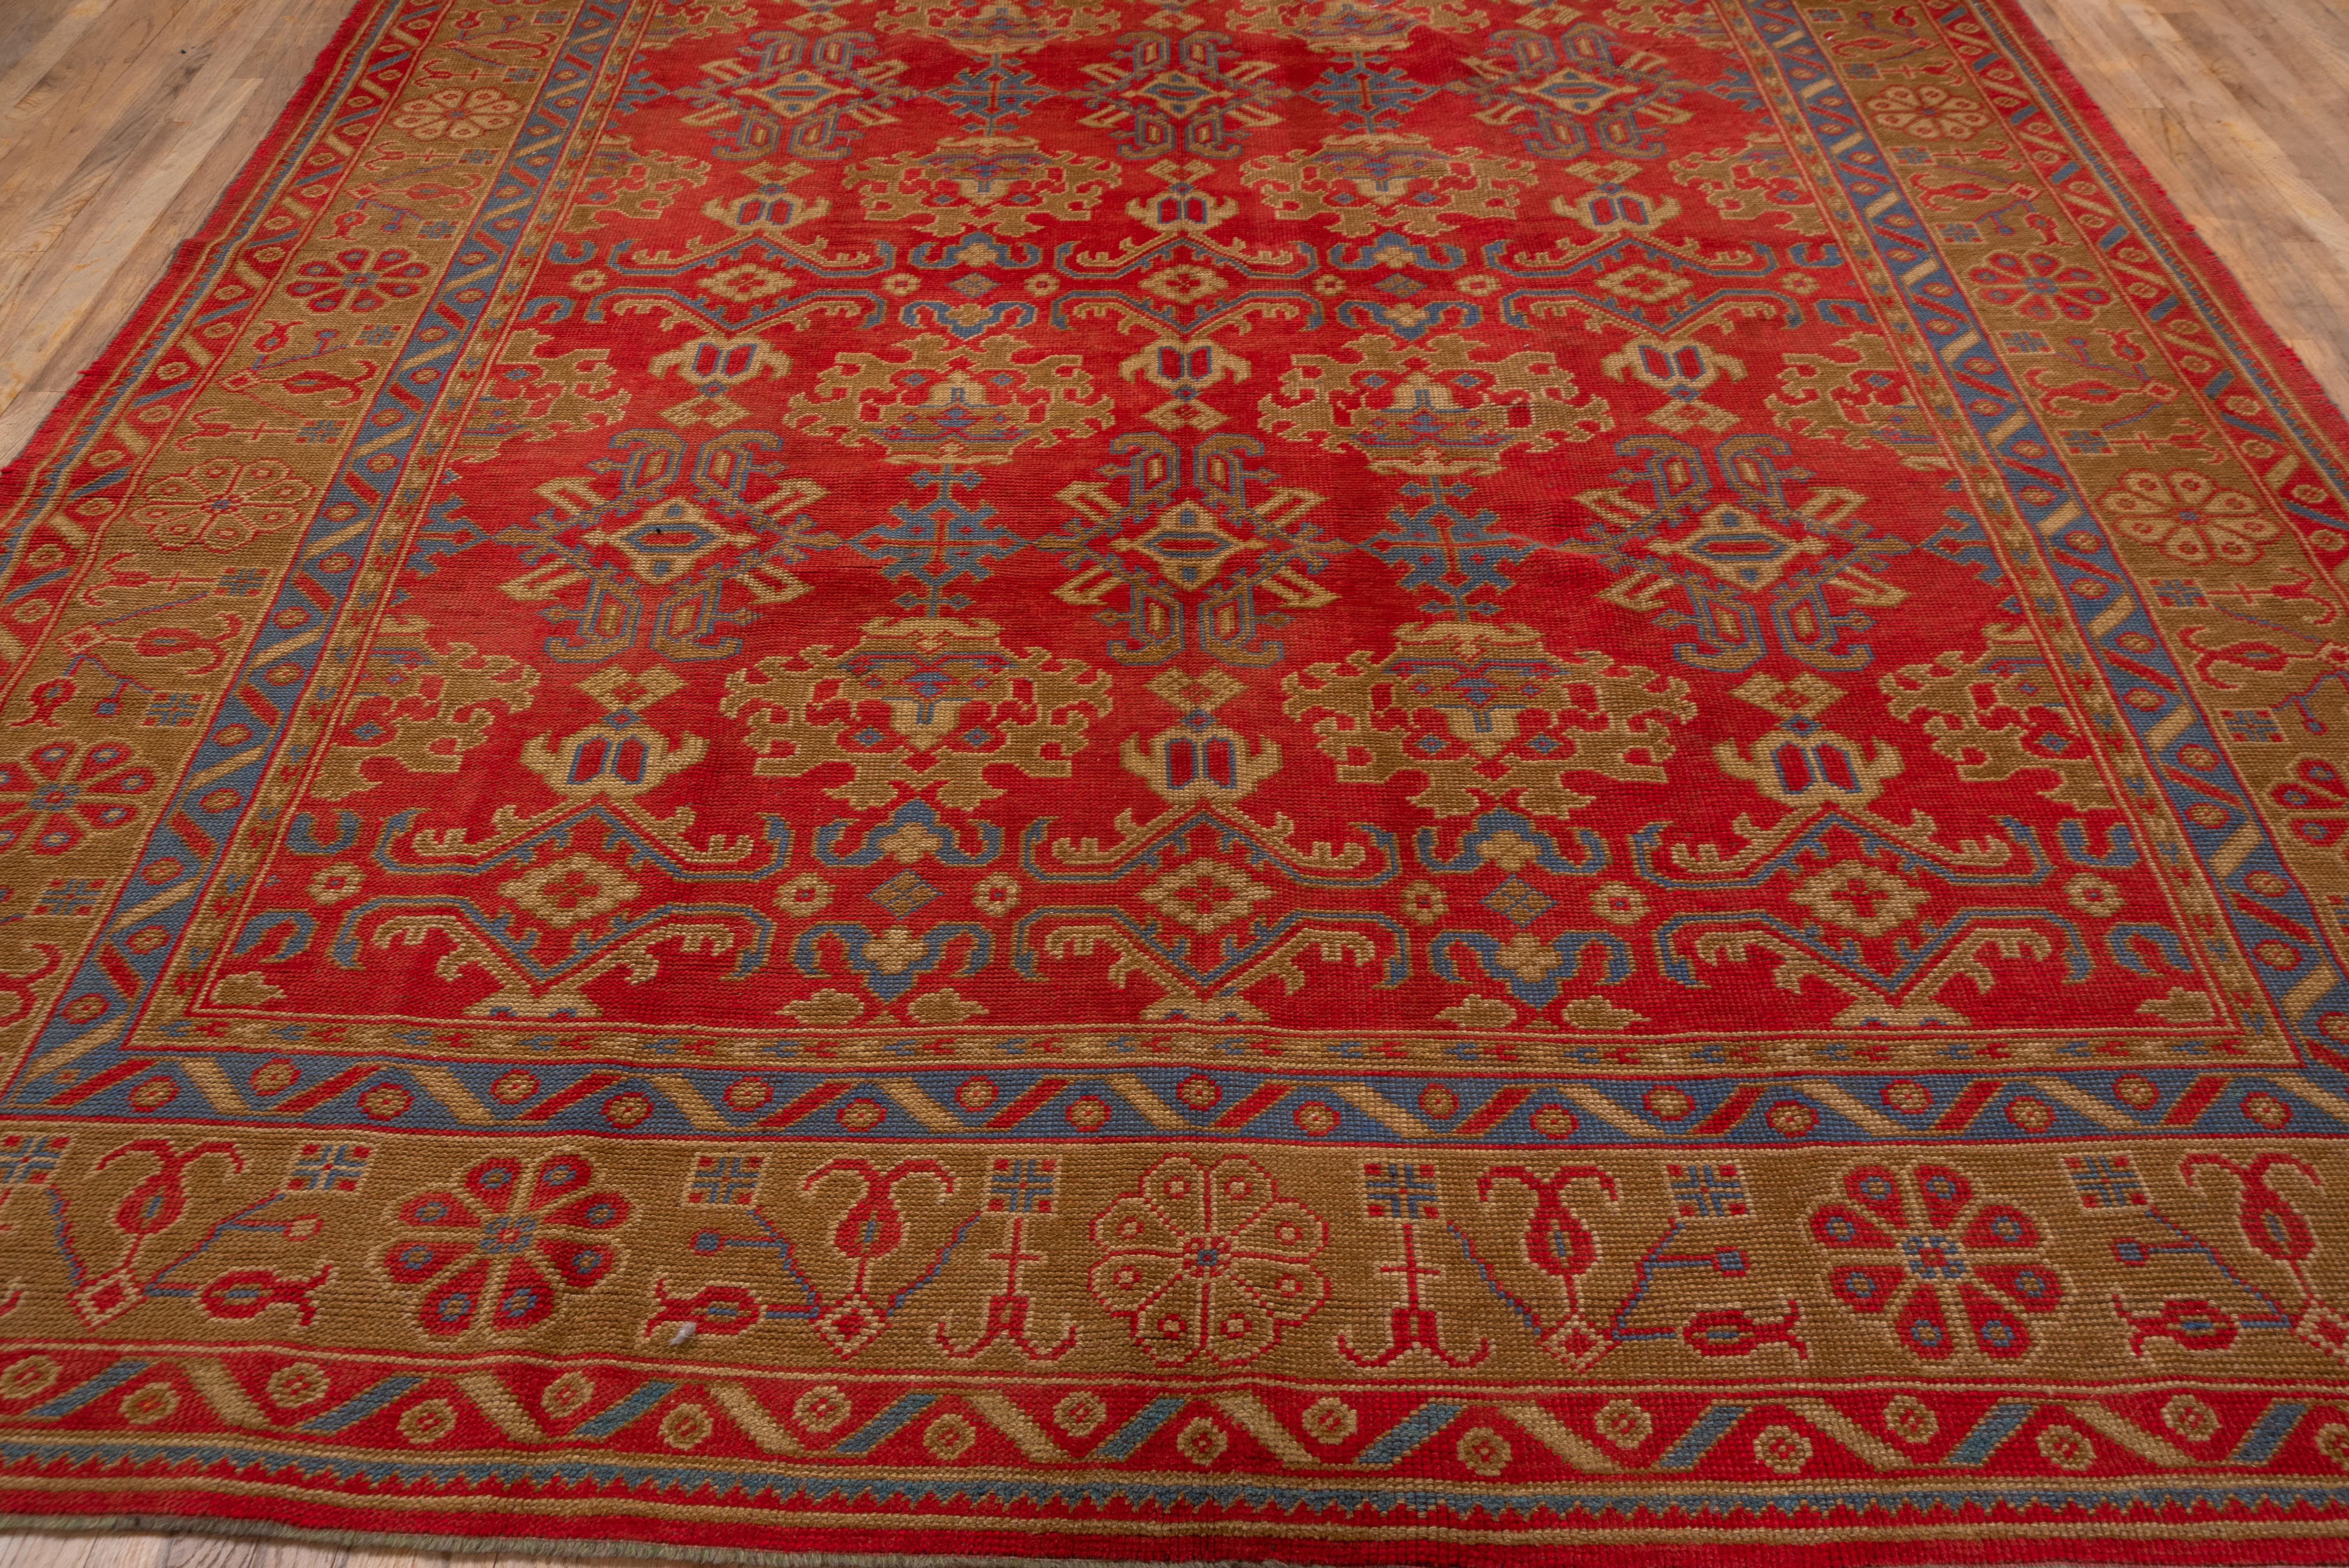 Hand-Knotted Colorful Antique Oushak Rug, Bright Red Field, Multicolored Borders, circa 1930s For Sale